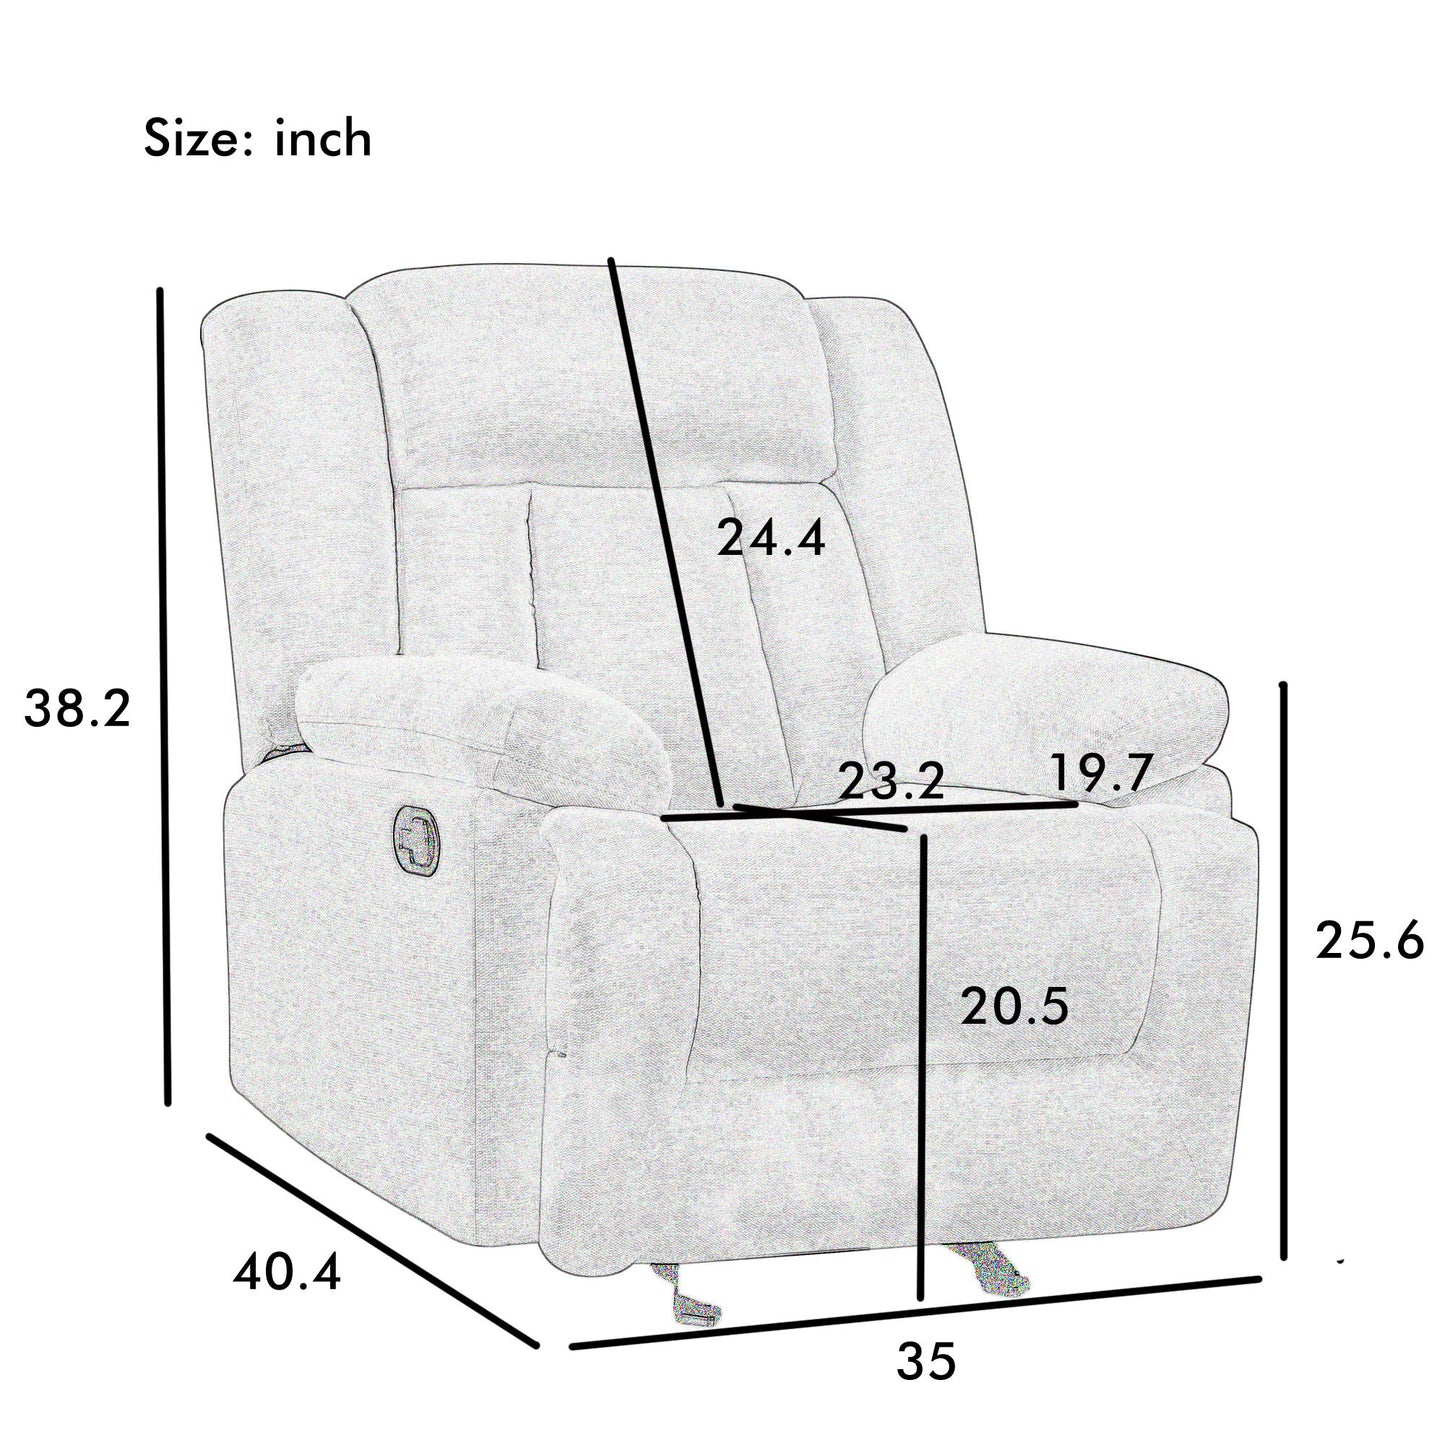 Manual Recliner Chair, Heavy Duty Reclining Mechanism with Thick Seat and Backrest, Elderly Single Recliner Rocker Sofa for Bedroom Home Theater Office, 35"L x 40"W x 38"H, Blue